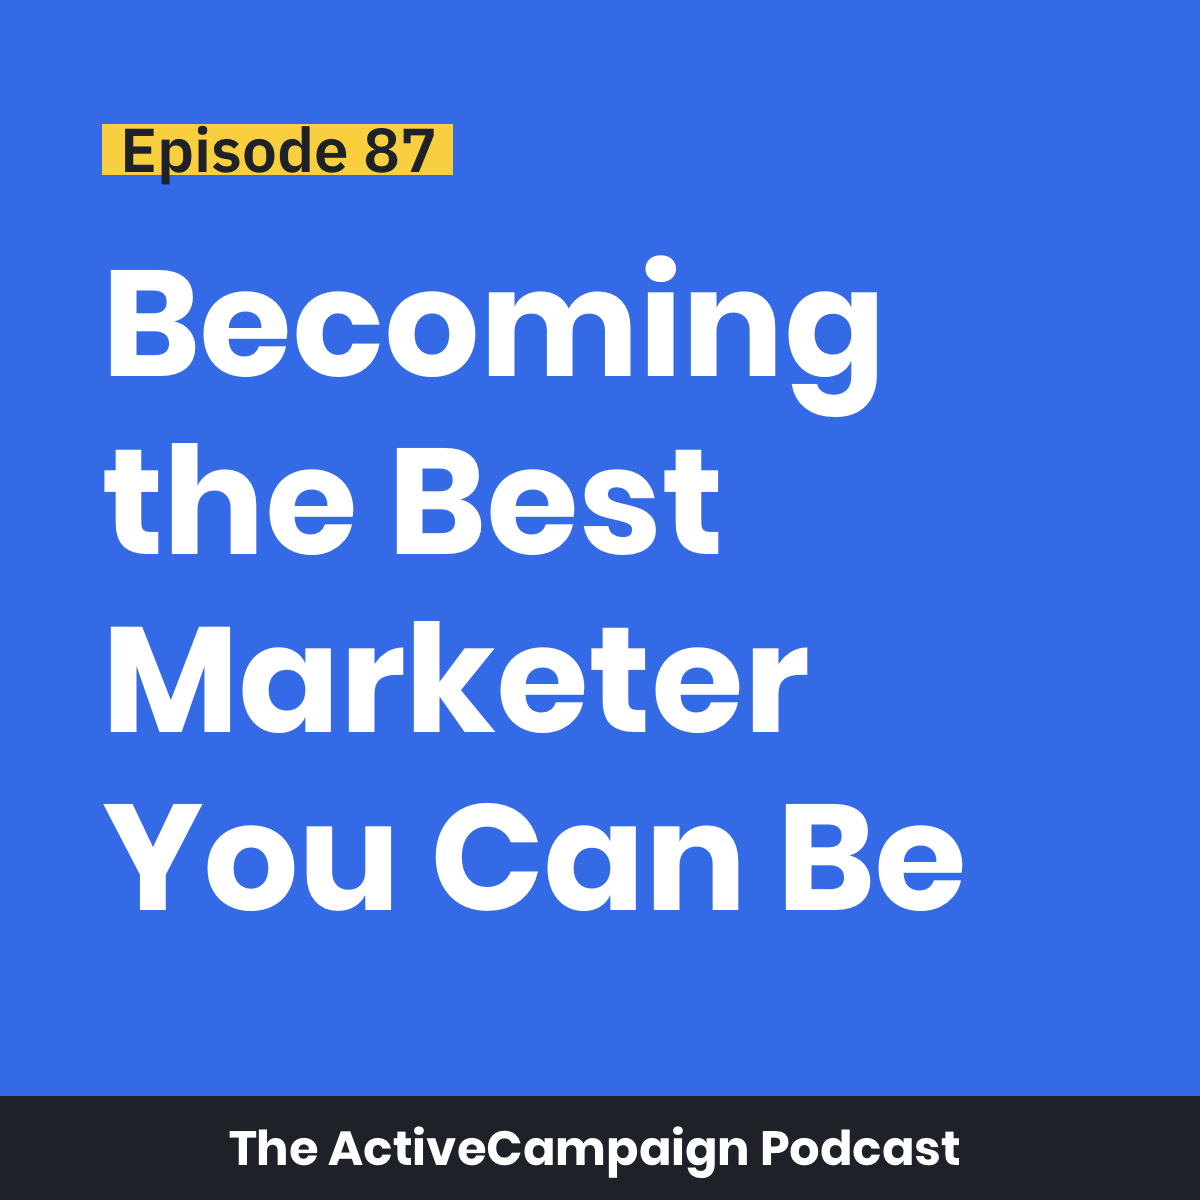 Pm Podcast Episode Spreadsheet for Episode 87: Becoming The Best Marketer You Can Be ...